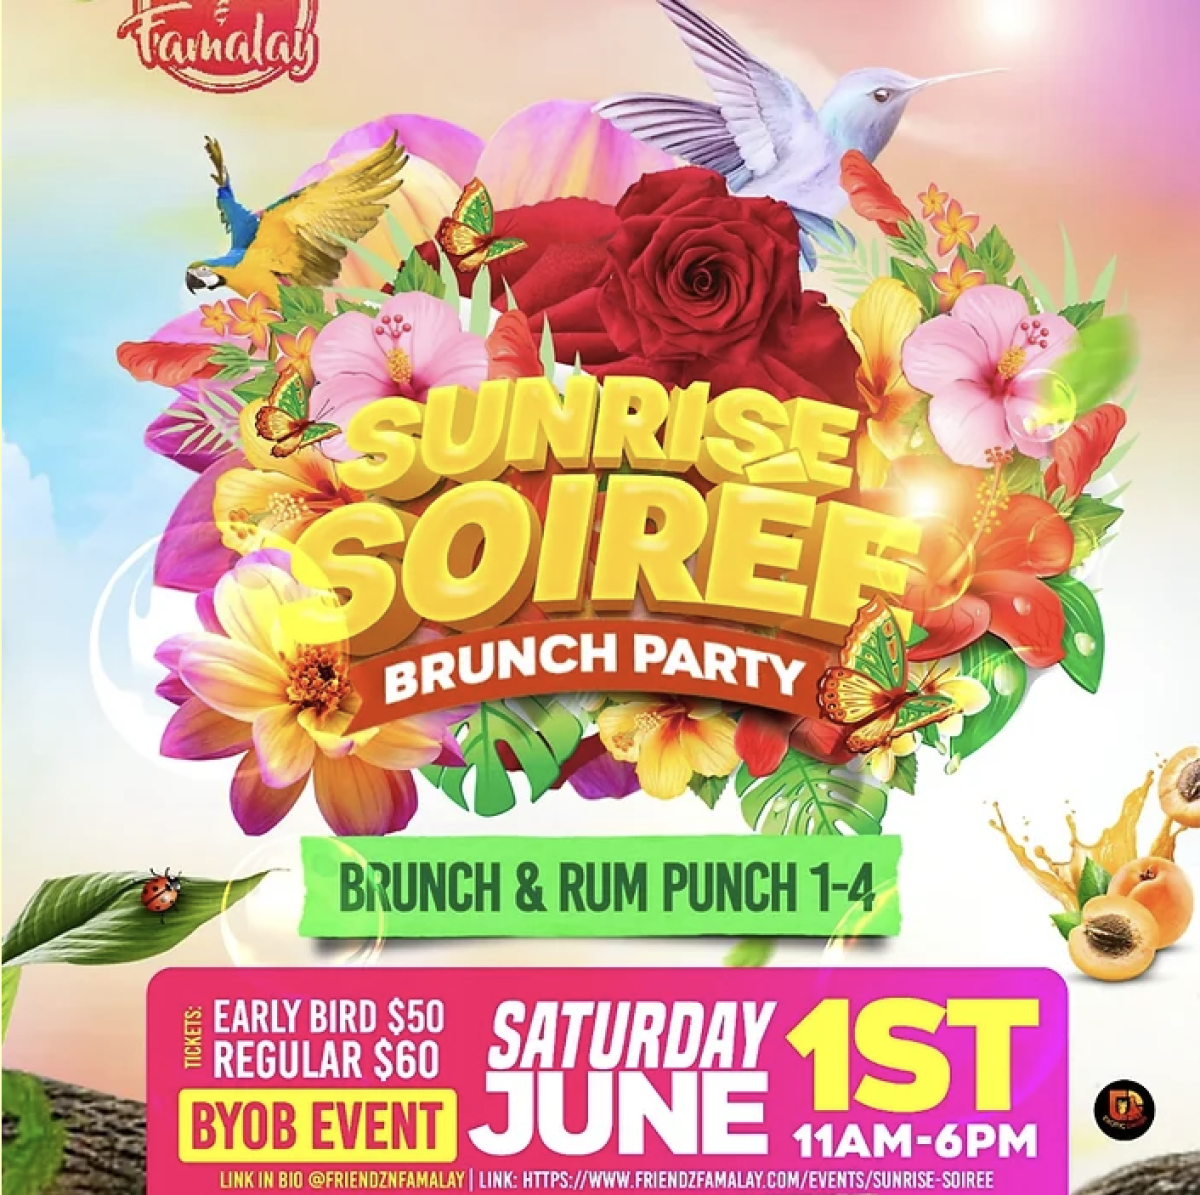 Sunrise Soiree flyer or graphic.